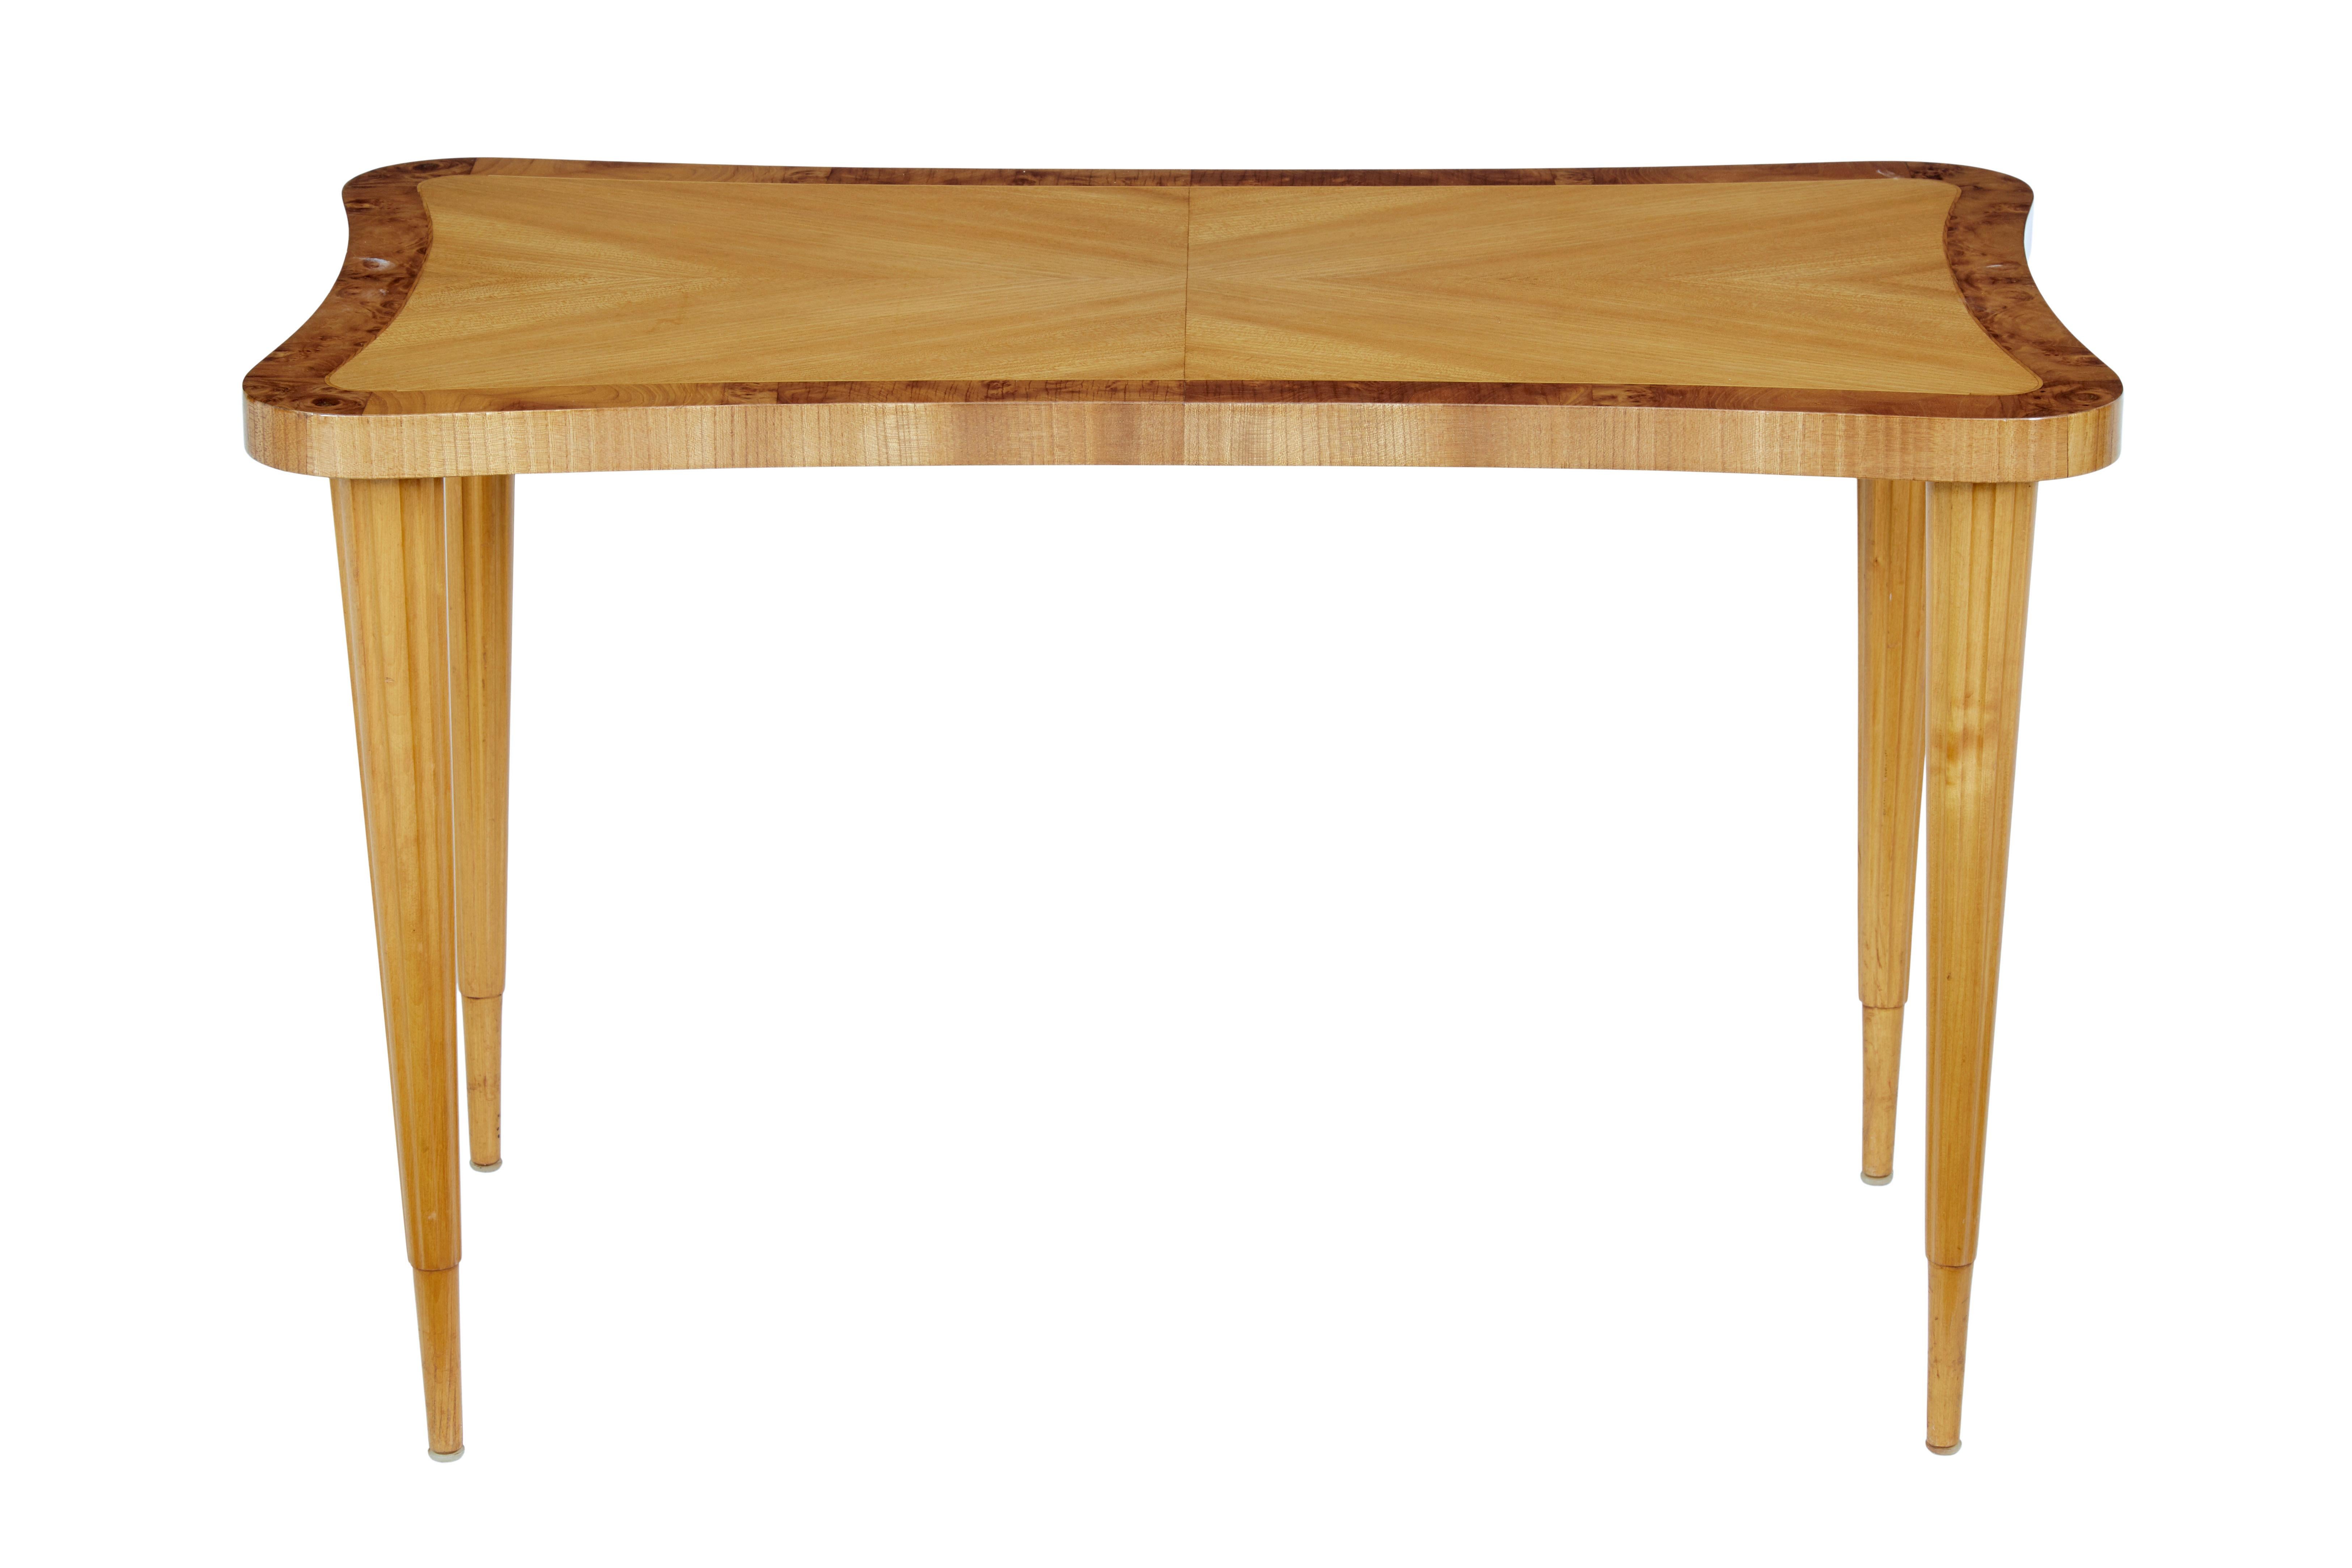 Hand-Crafted Mid 20th Century Scandinavian Birch Shaped Coffee Table